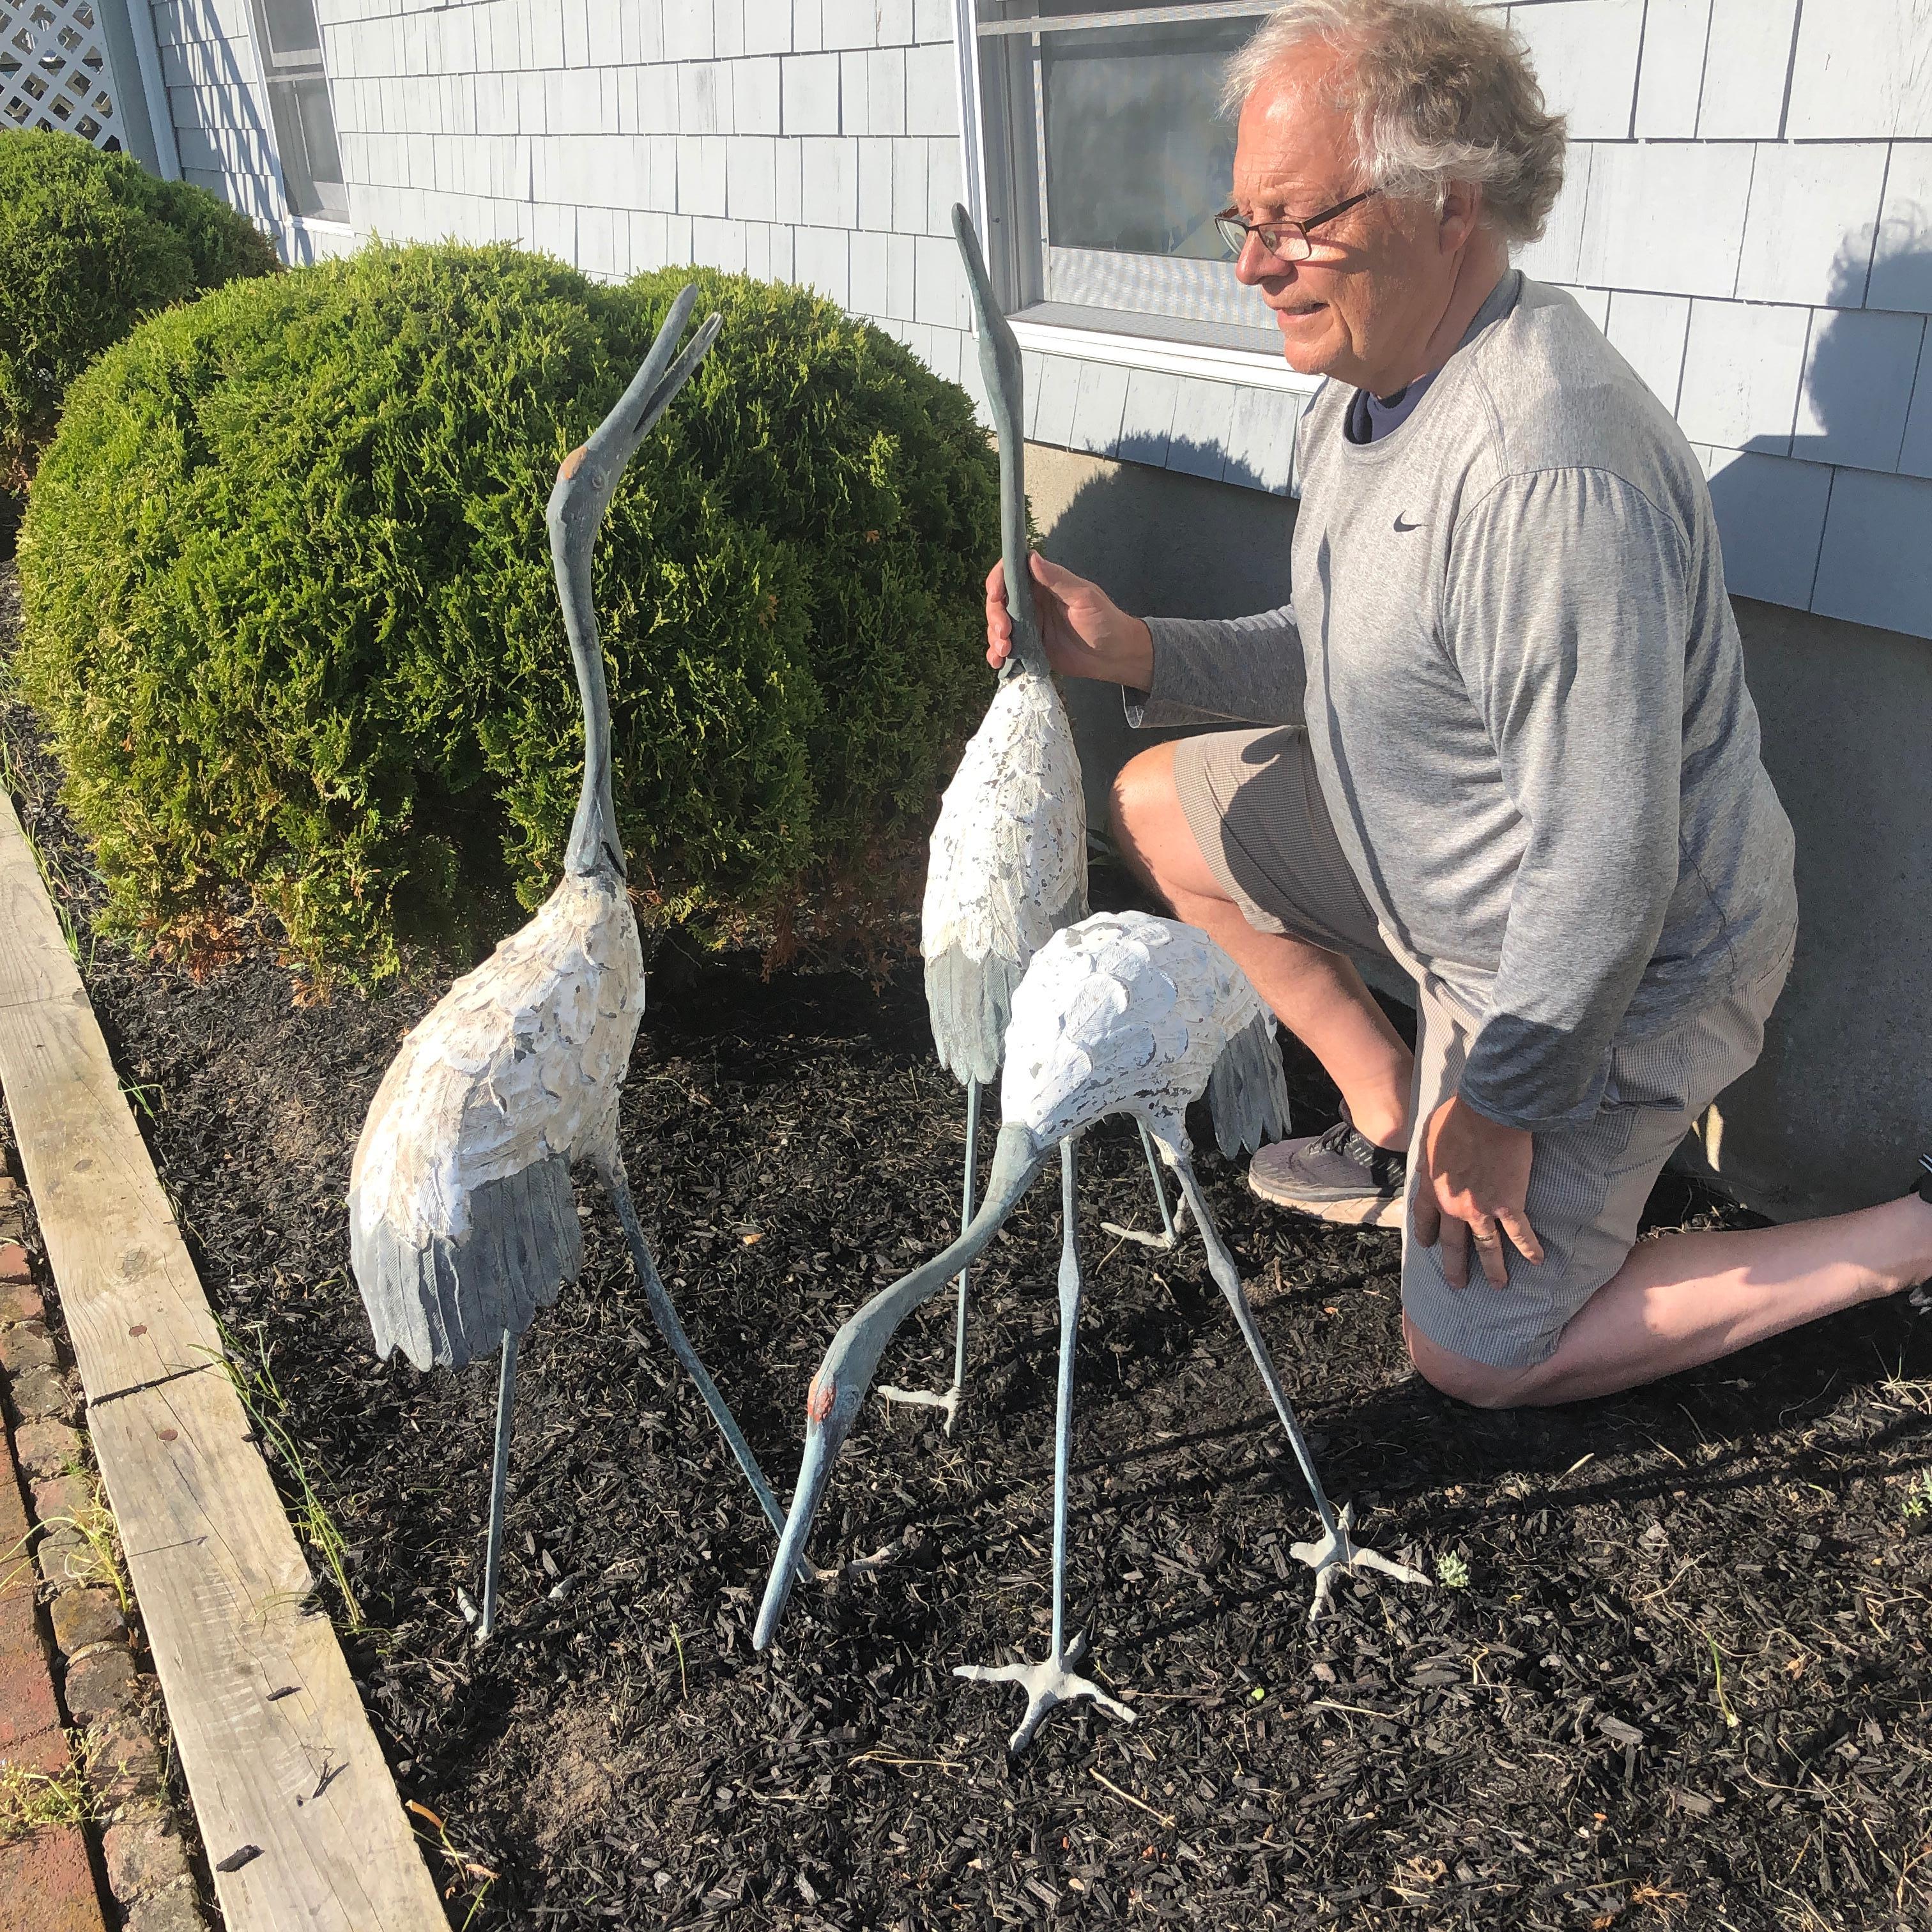 Fresh find from our recent Japanese Acquisitions

Our last complete set

Japan, a fine set of three tall and large scale hand caste bronze finely detailed red crested cranes. Attractive variegated green patina surfaces punctuated with old hand